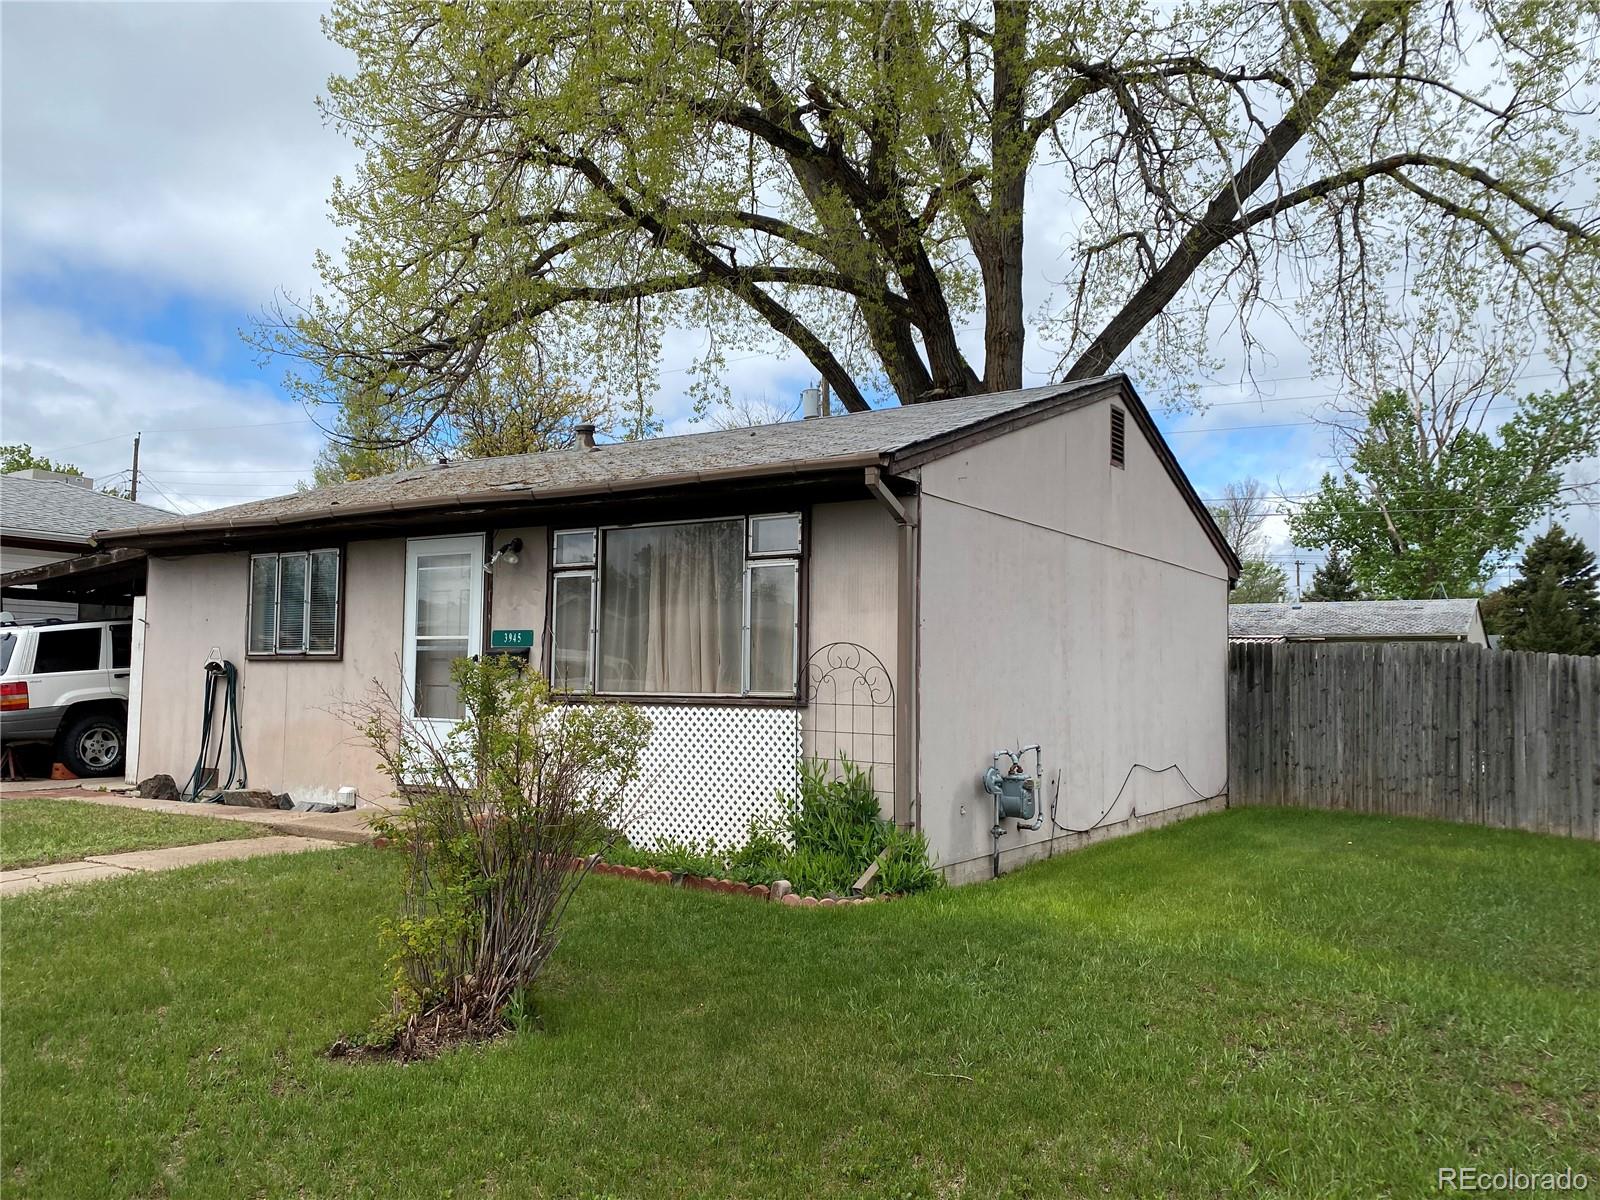 Report Image for 3945 S Grove Street,Englewood, Colorado